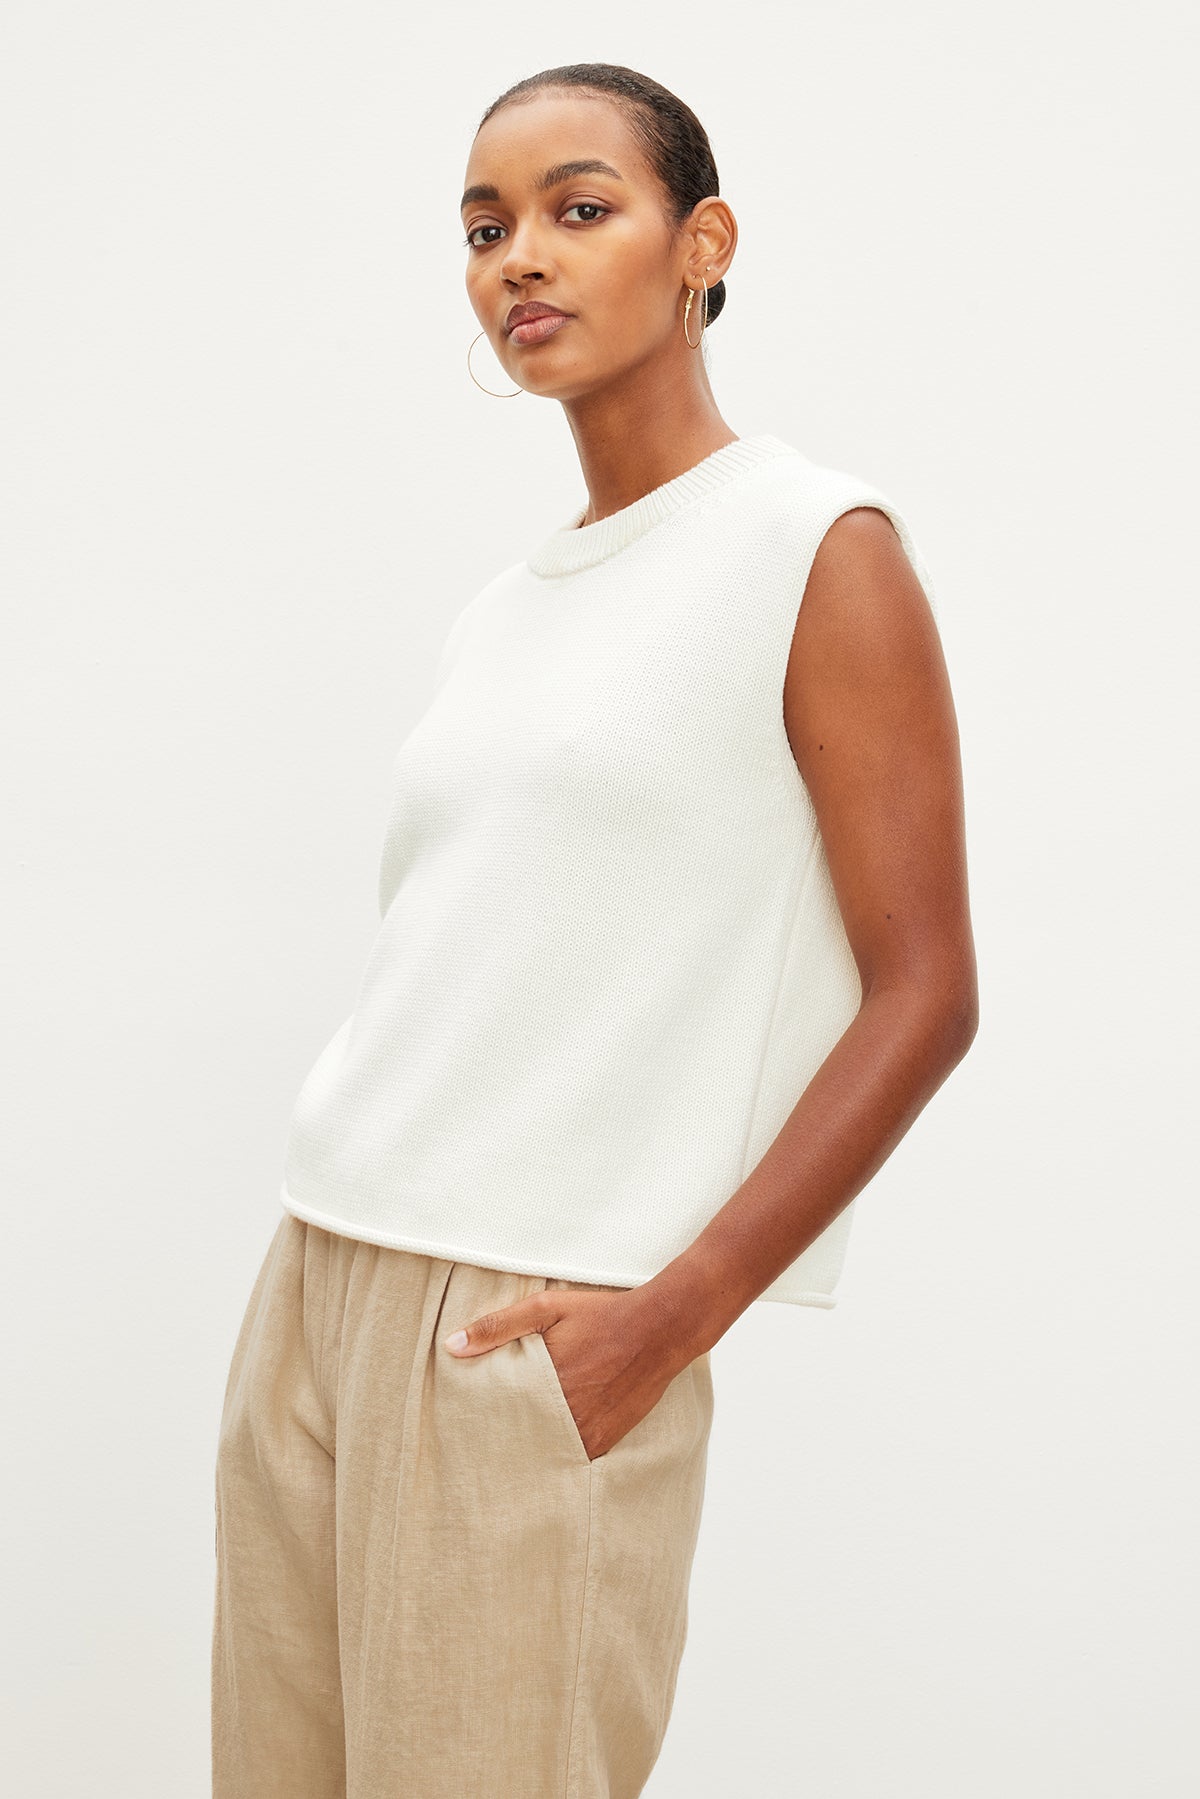   The model is wearing a white ASTER CREW NECK SWEATER and tan trousers, made of a luxurious cotton cashmere blend by Velvet by Graham & Spencer. 